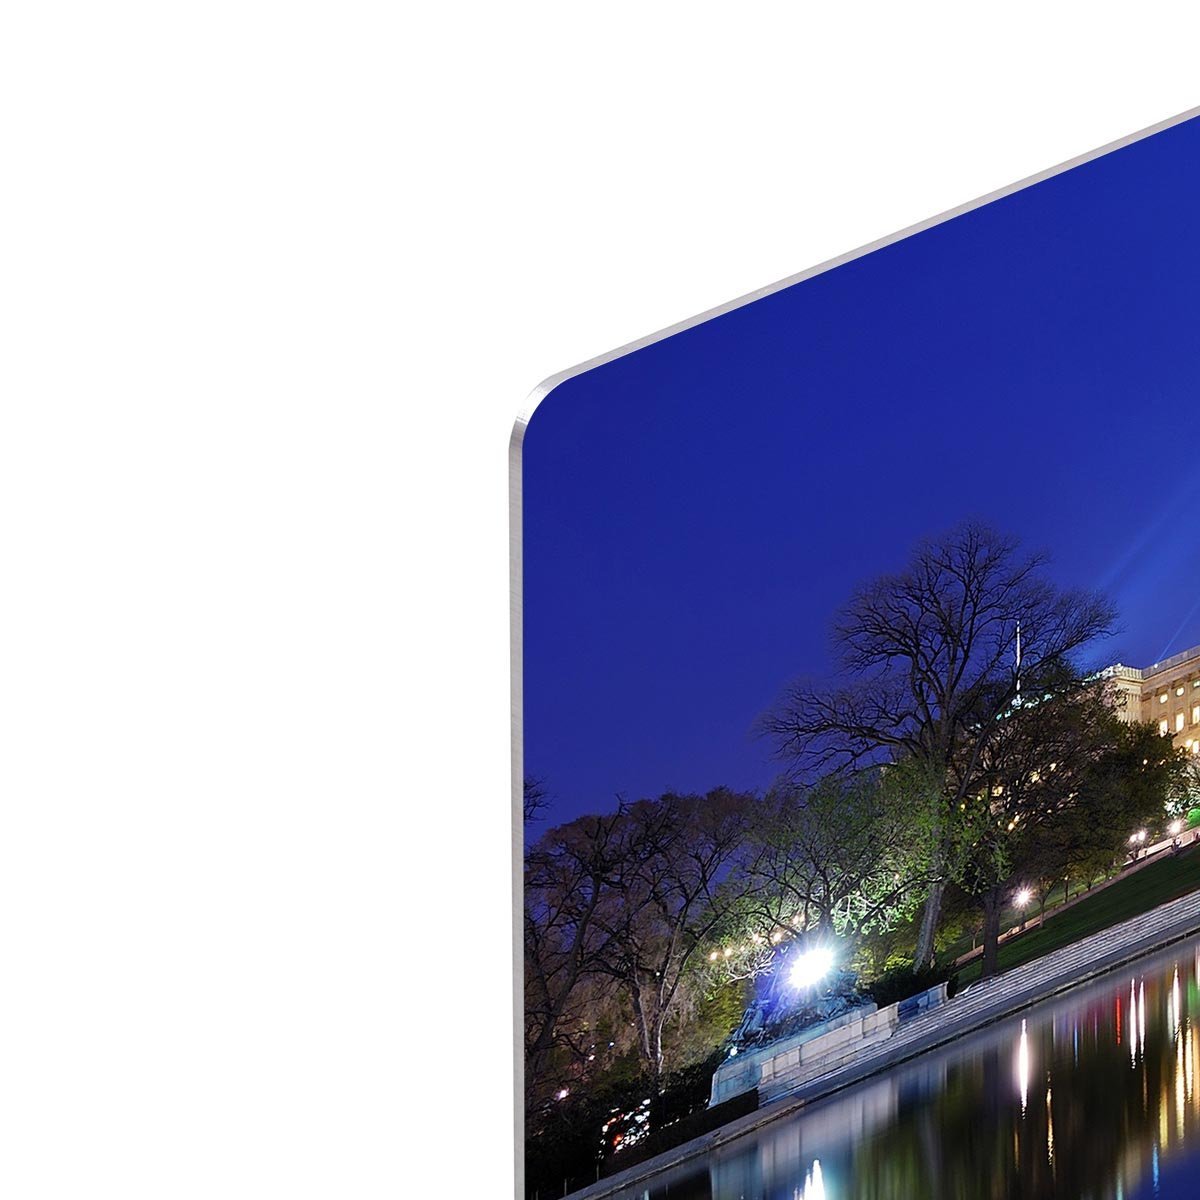 Capitol Hill Building at dusk with lake reflection HD Metal Print